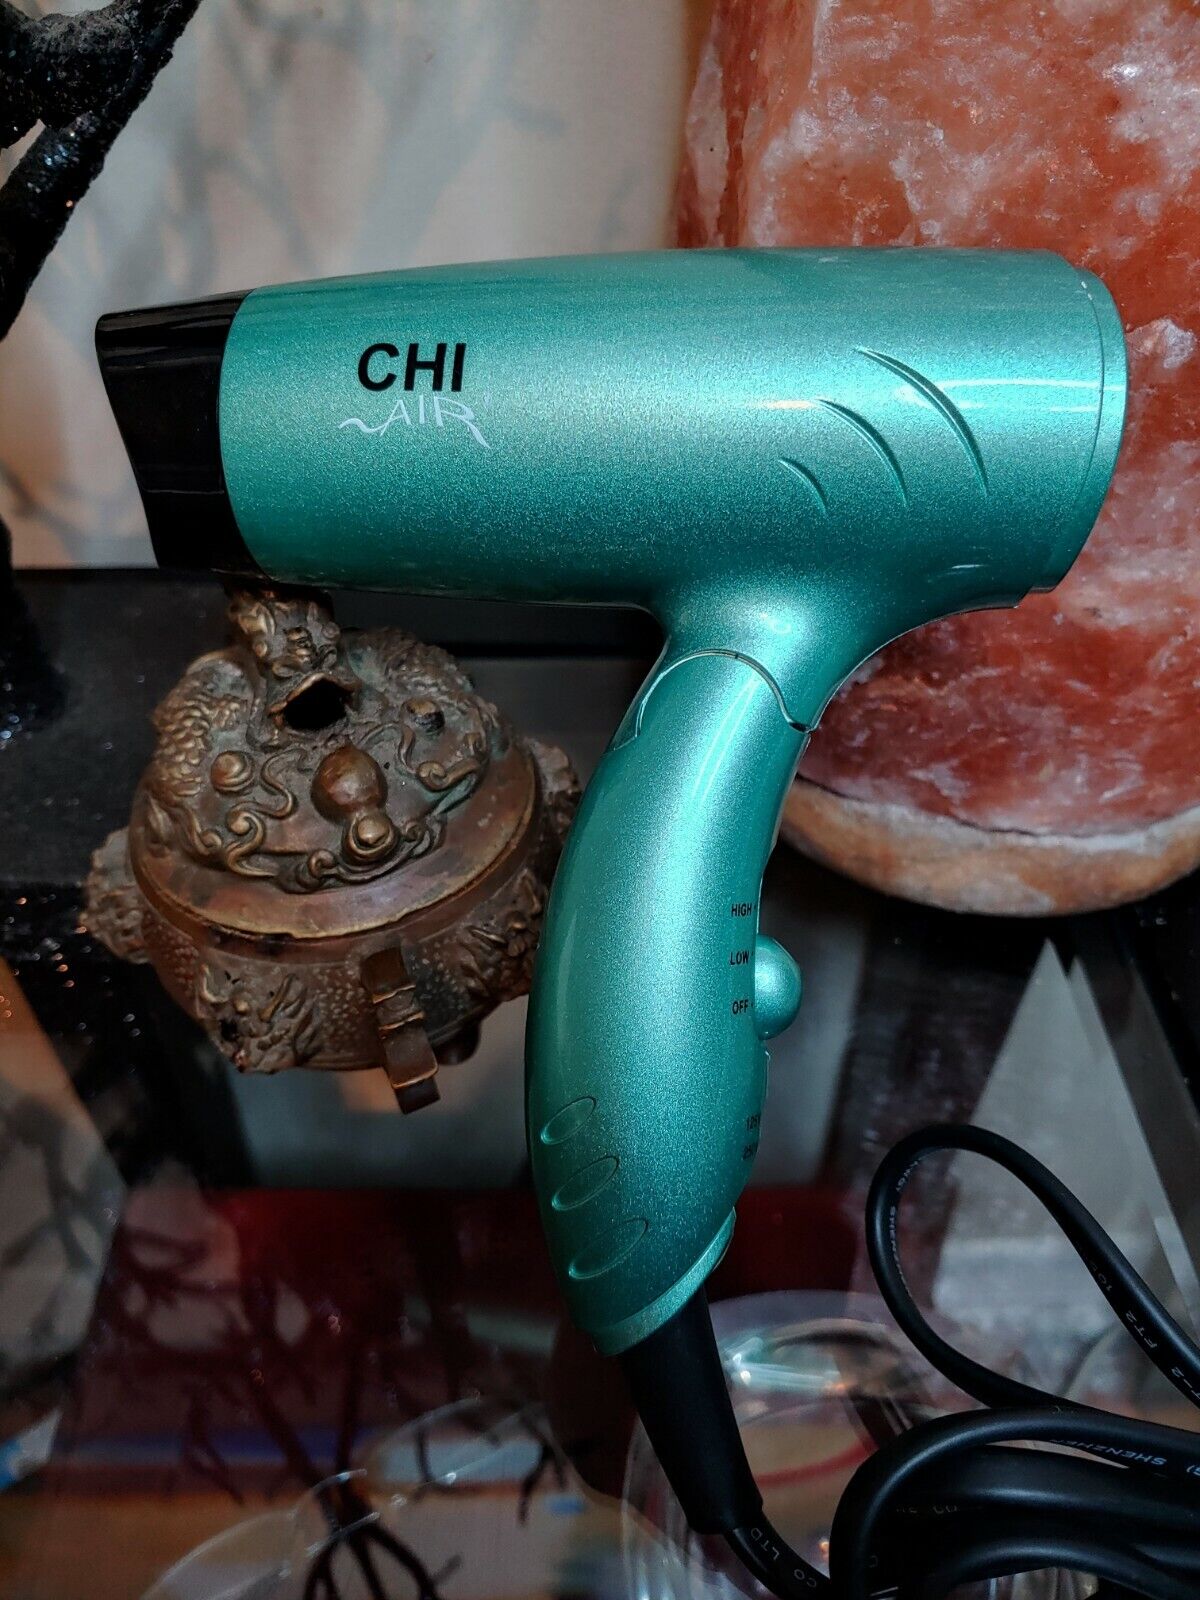 Chi Air Mini Hair Dryer Travel Size Metal Green Ceramic A Must Have SHIPS FAST